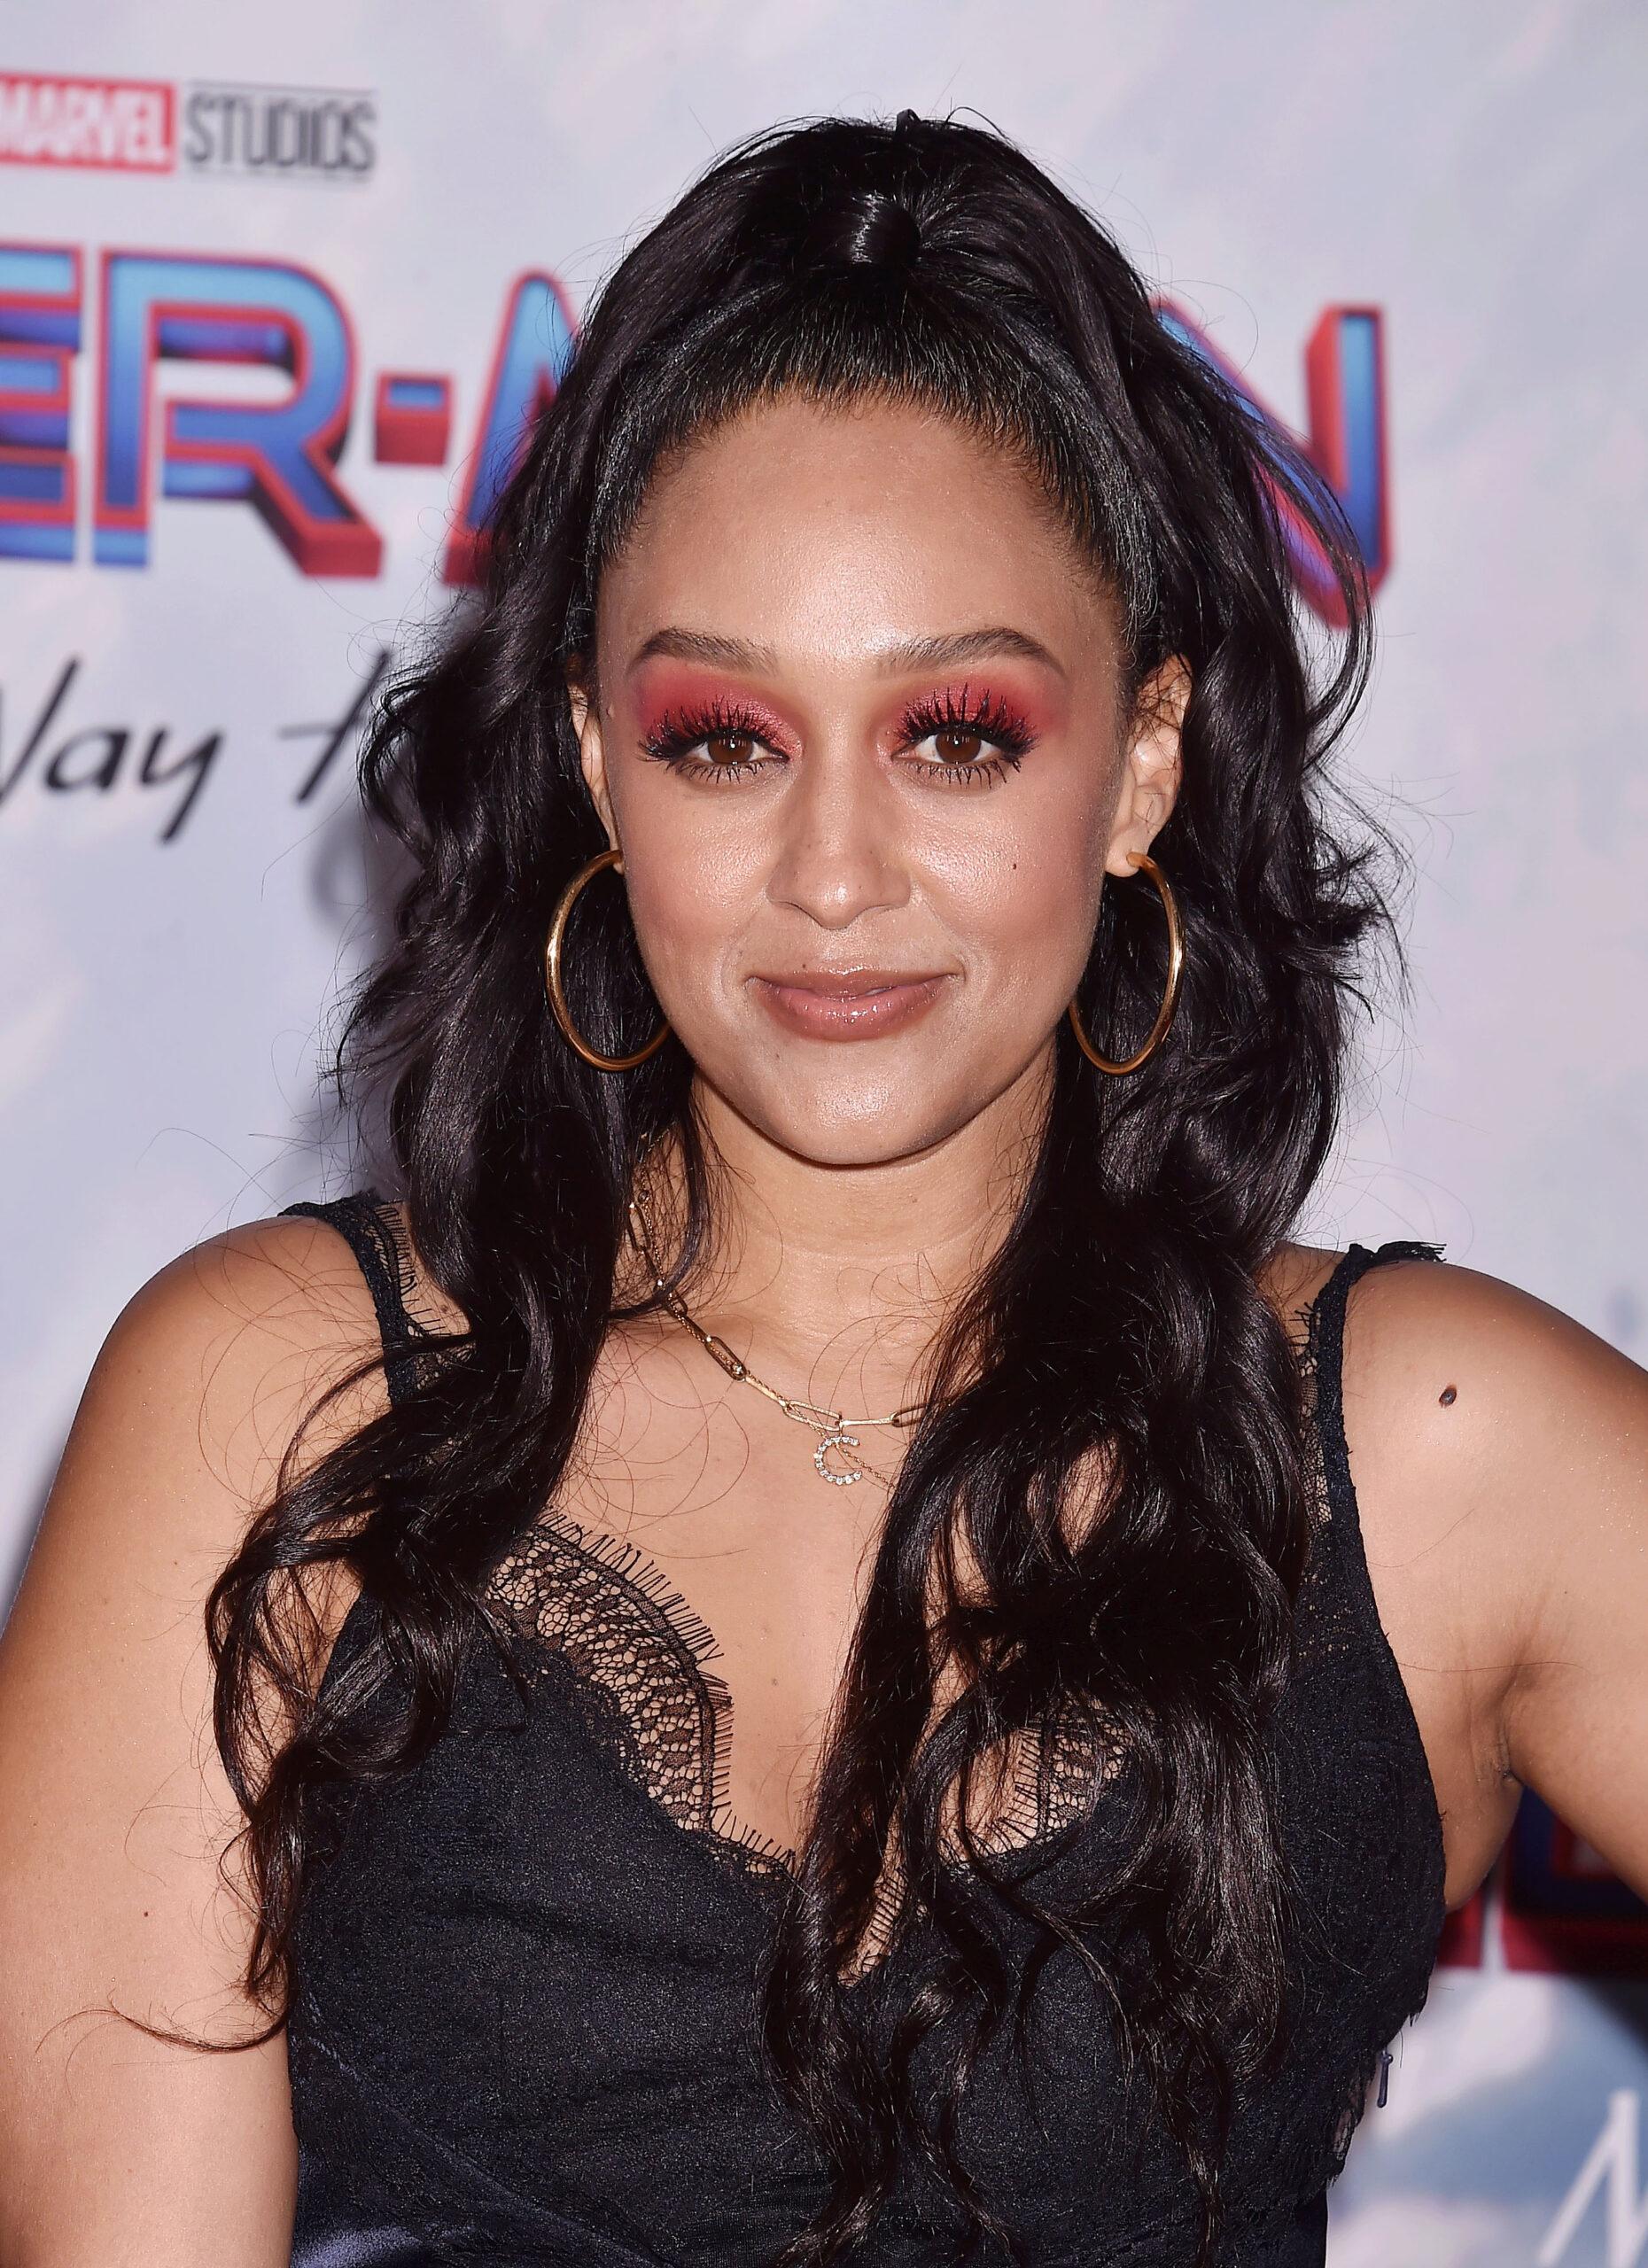 Tia Mowry at Sony Pictures' "Spider-Man: No Way Home" Los Angeles Premiere